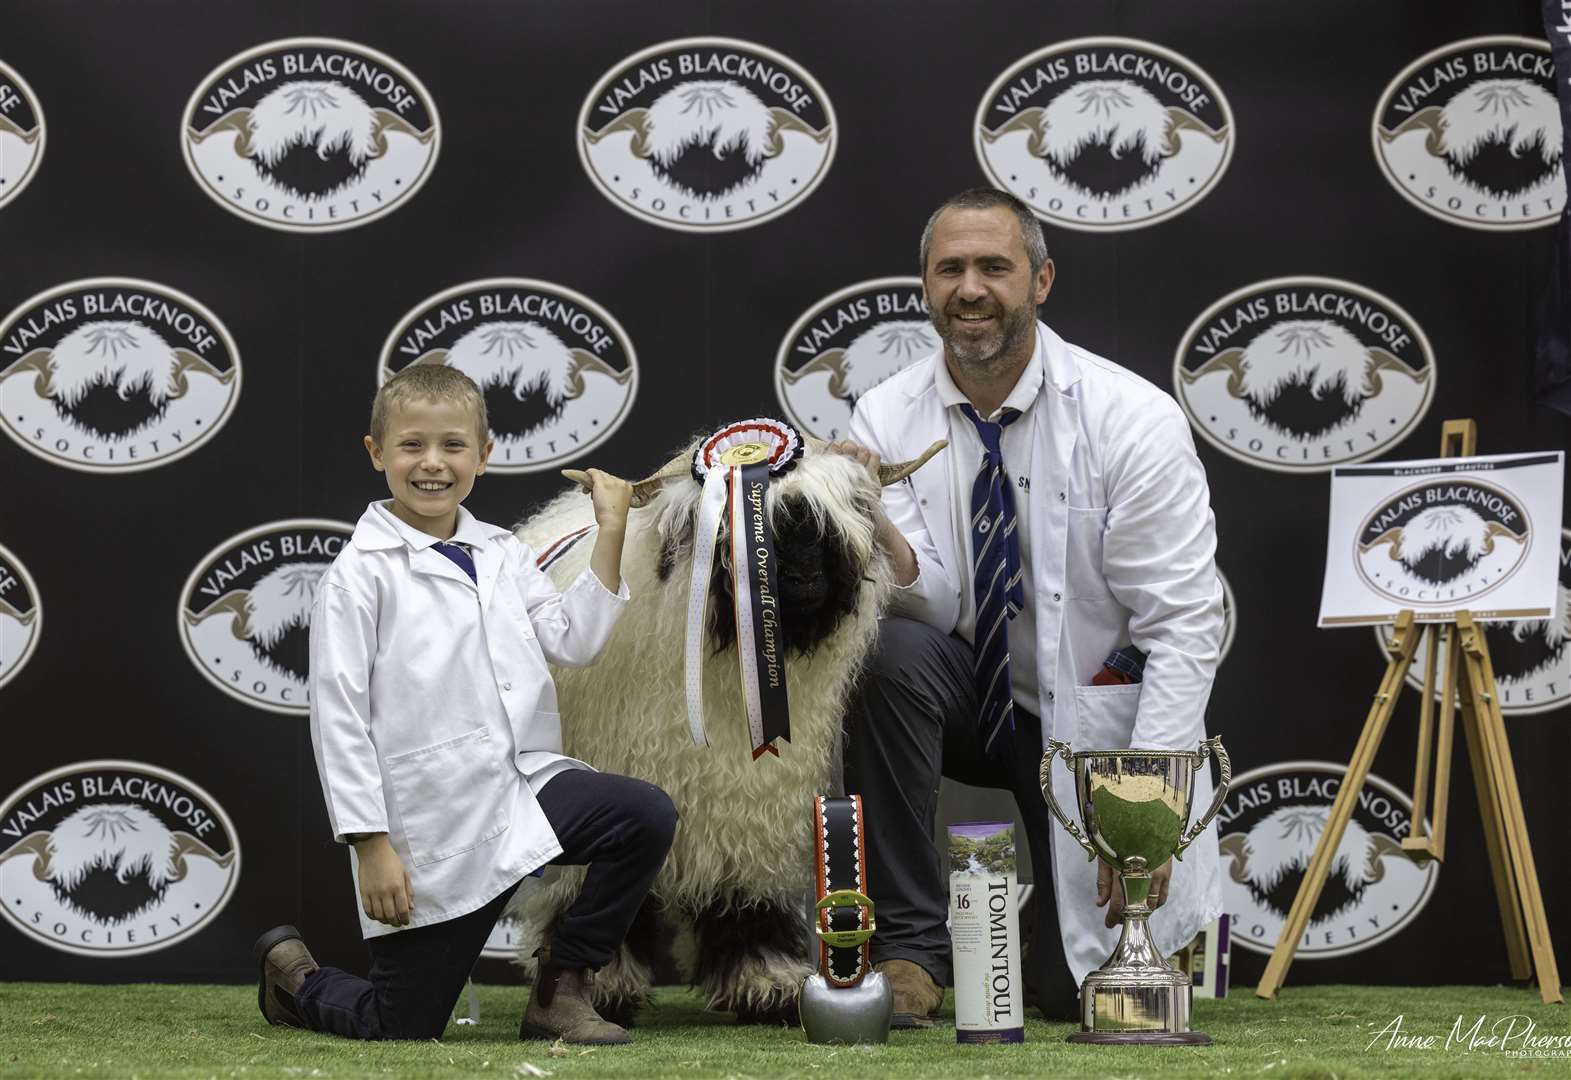 Excitement builds for 2023 Blacknose Beauties National Show and Sale